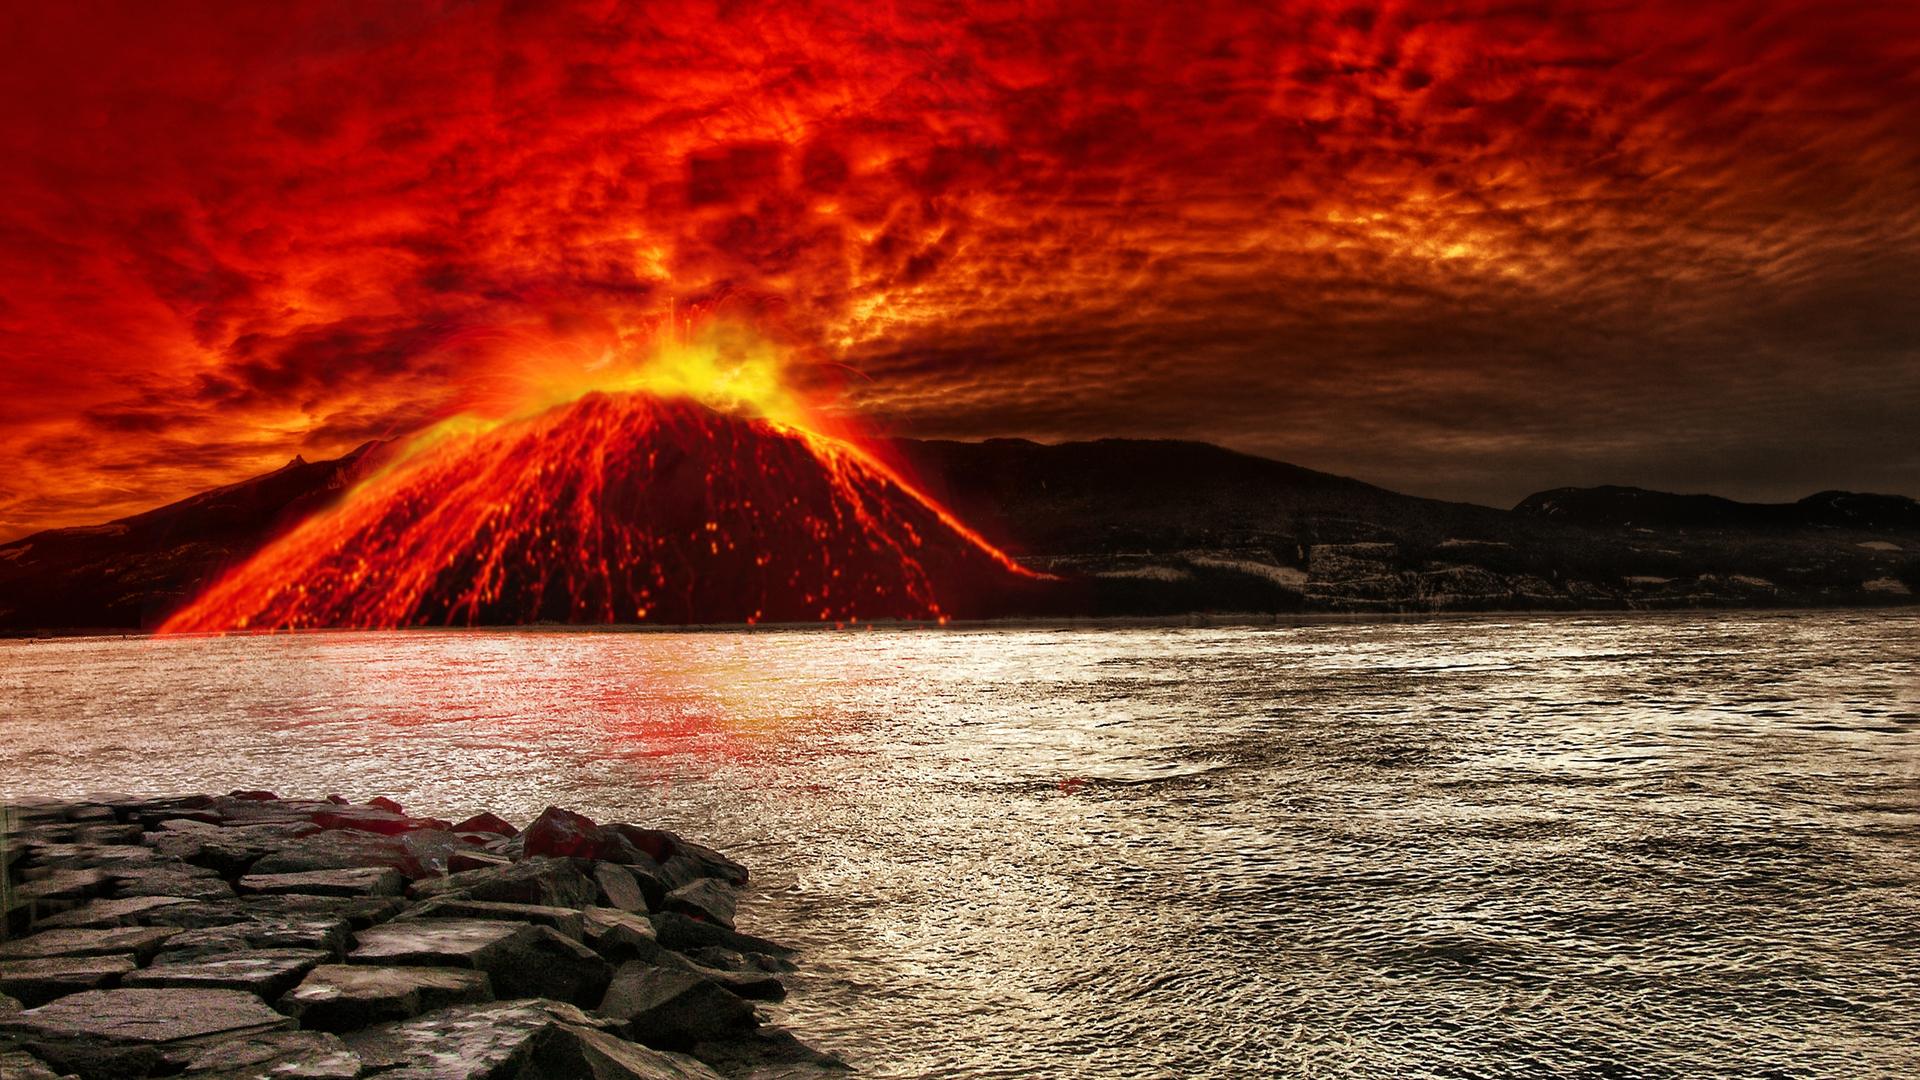 Amazing sky over volcanic eruption - - High Quality and other